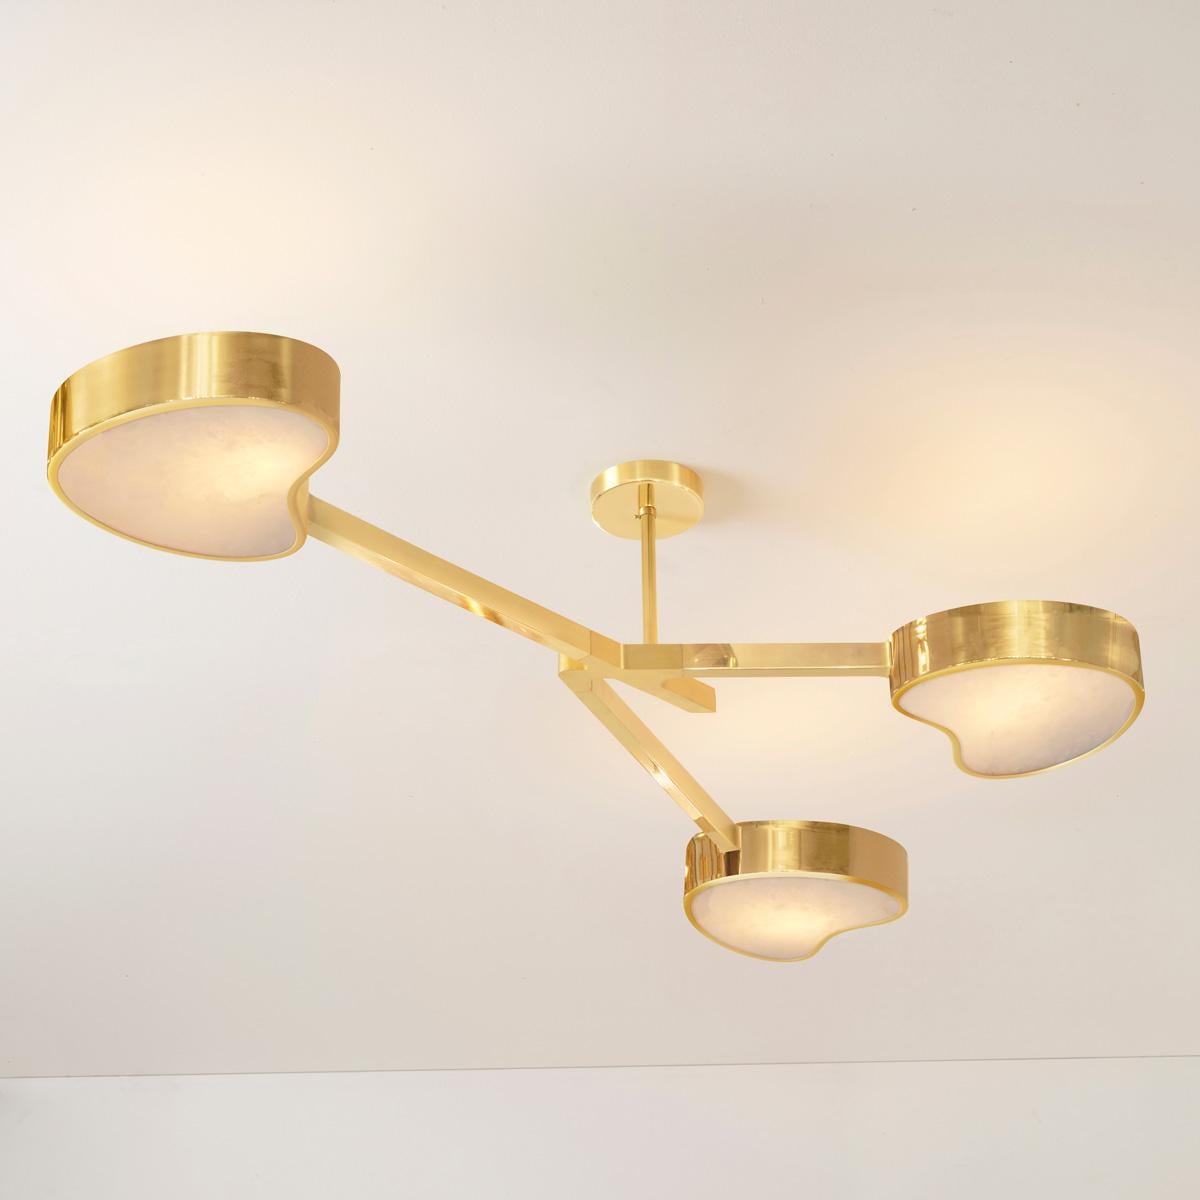 Cuore N.3 Ceiling Light by Gaspare Asaro. Bronze Finish For Sale 5